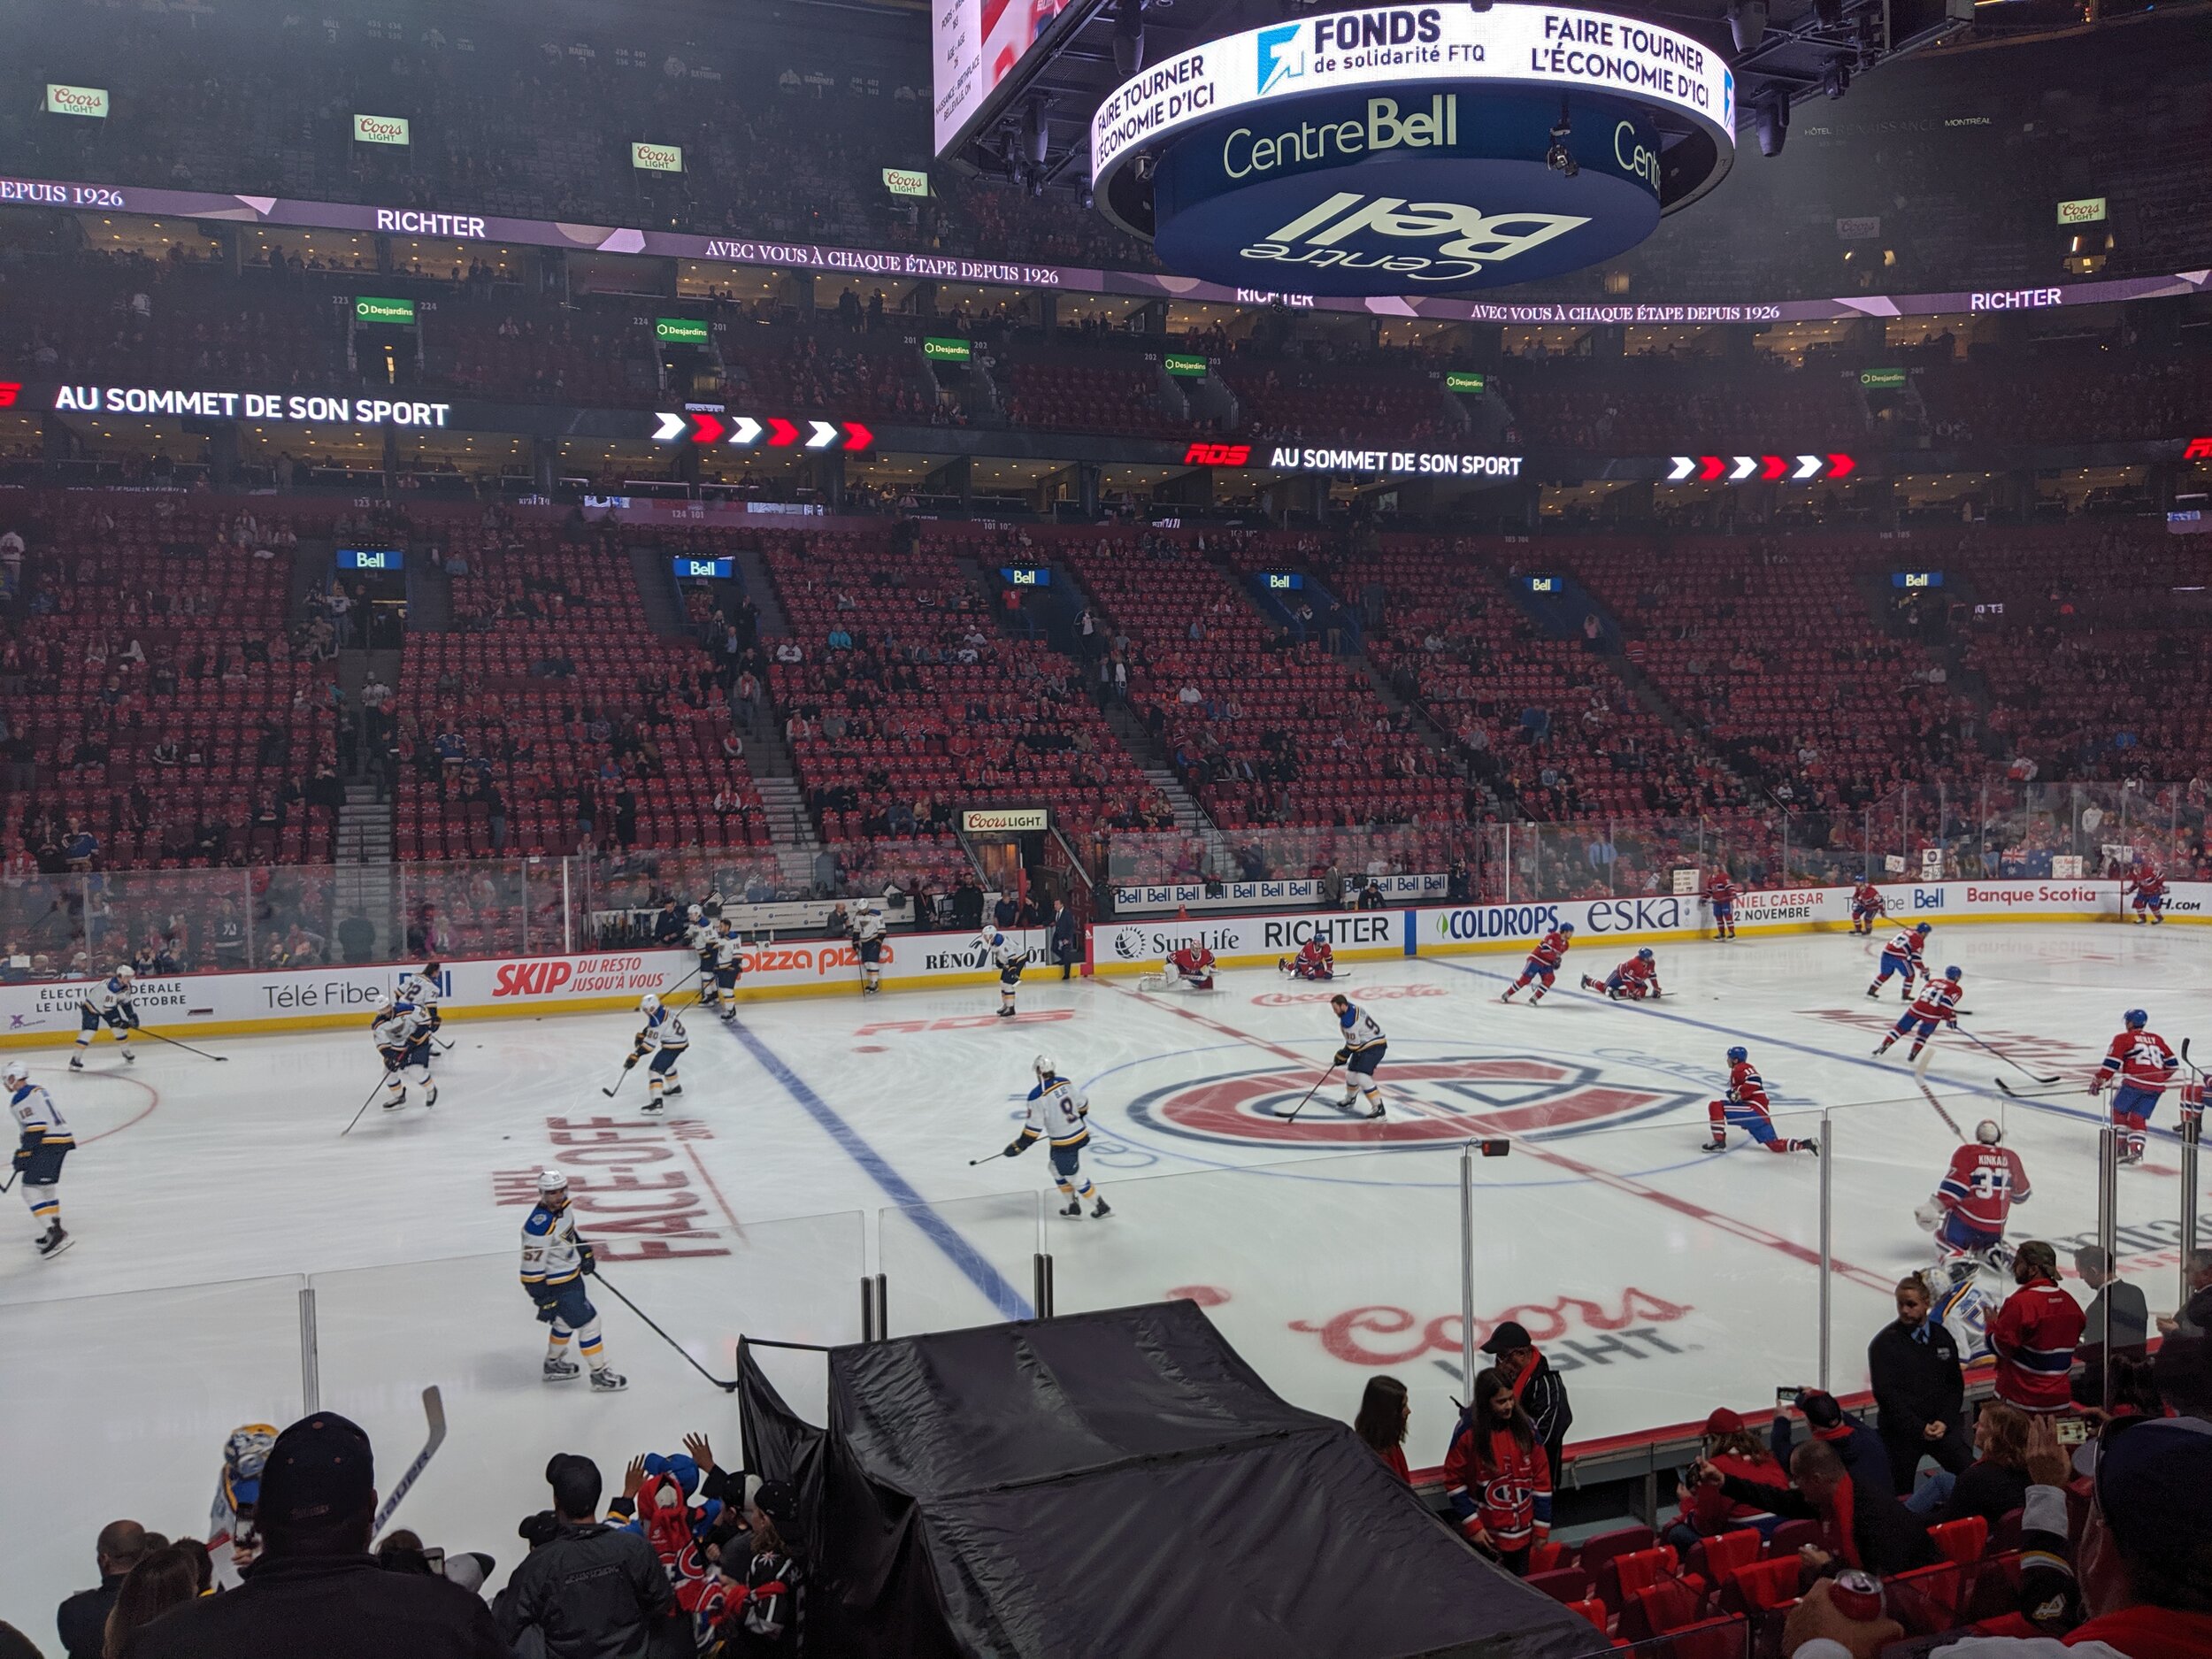 Ice hockey tournament at the bell center in Montreal